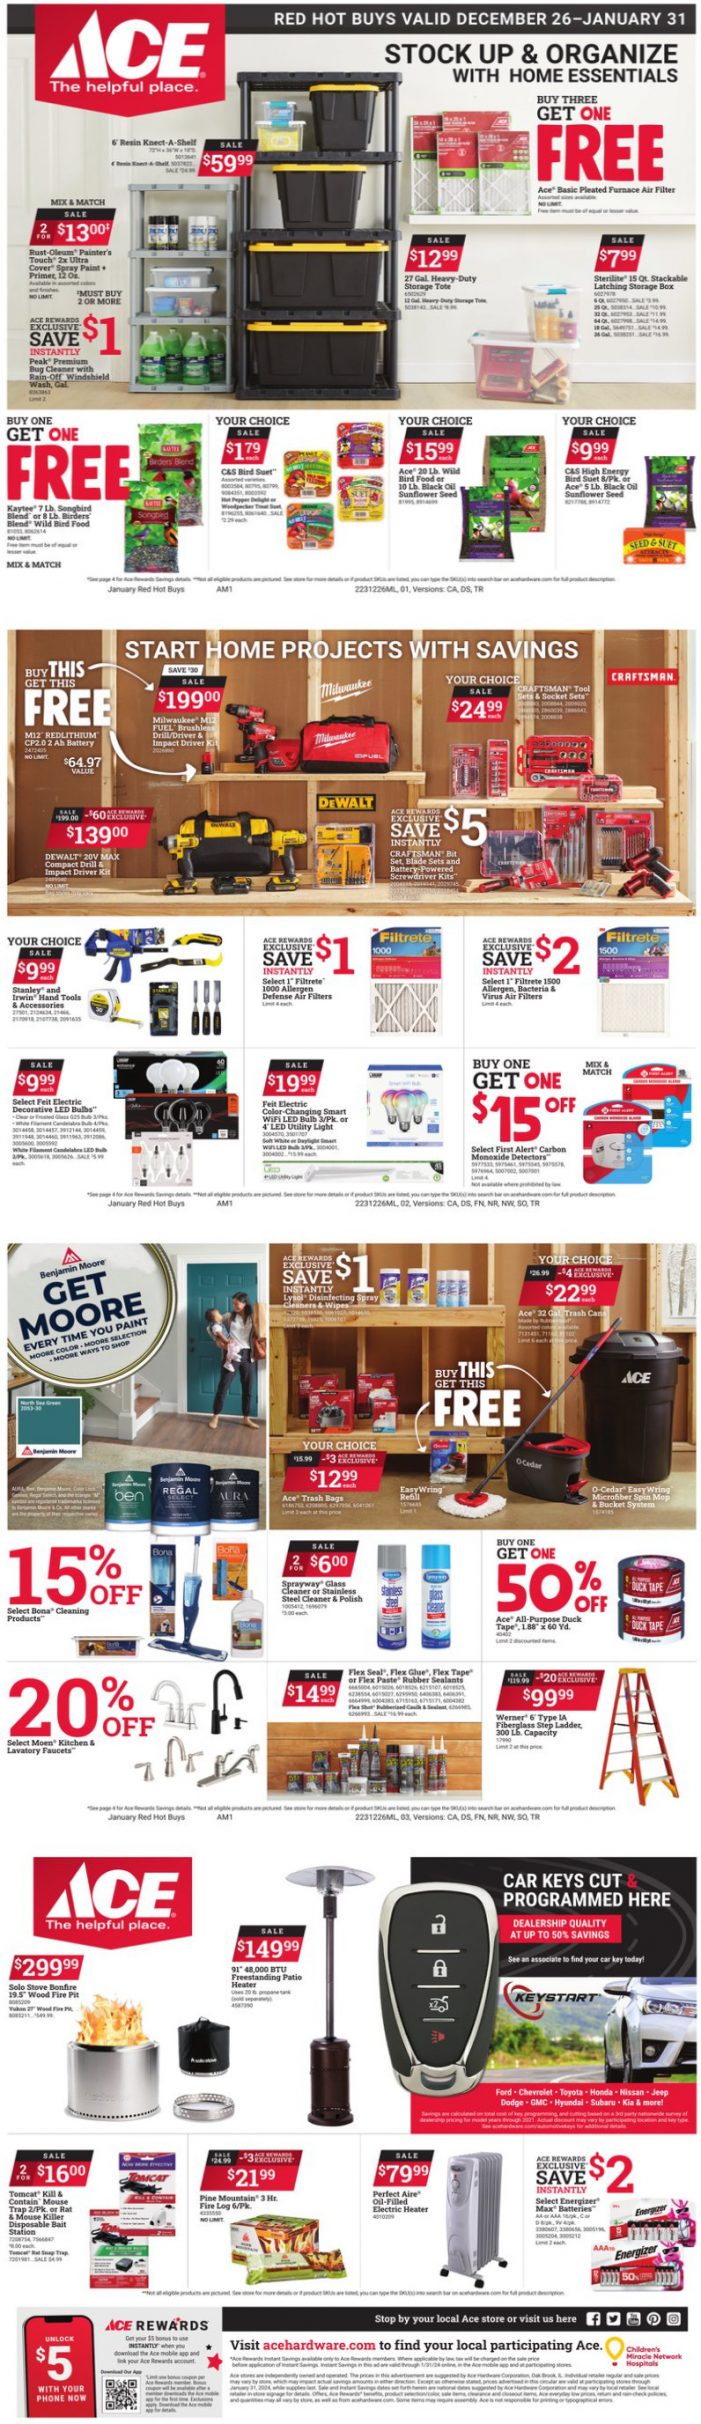 Sender’s Market Ace Hardware January Red Hot Buys